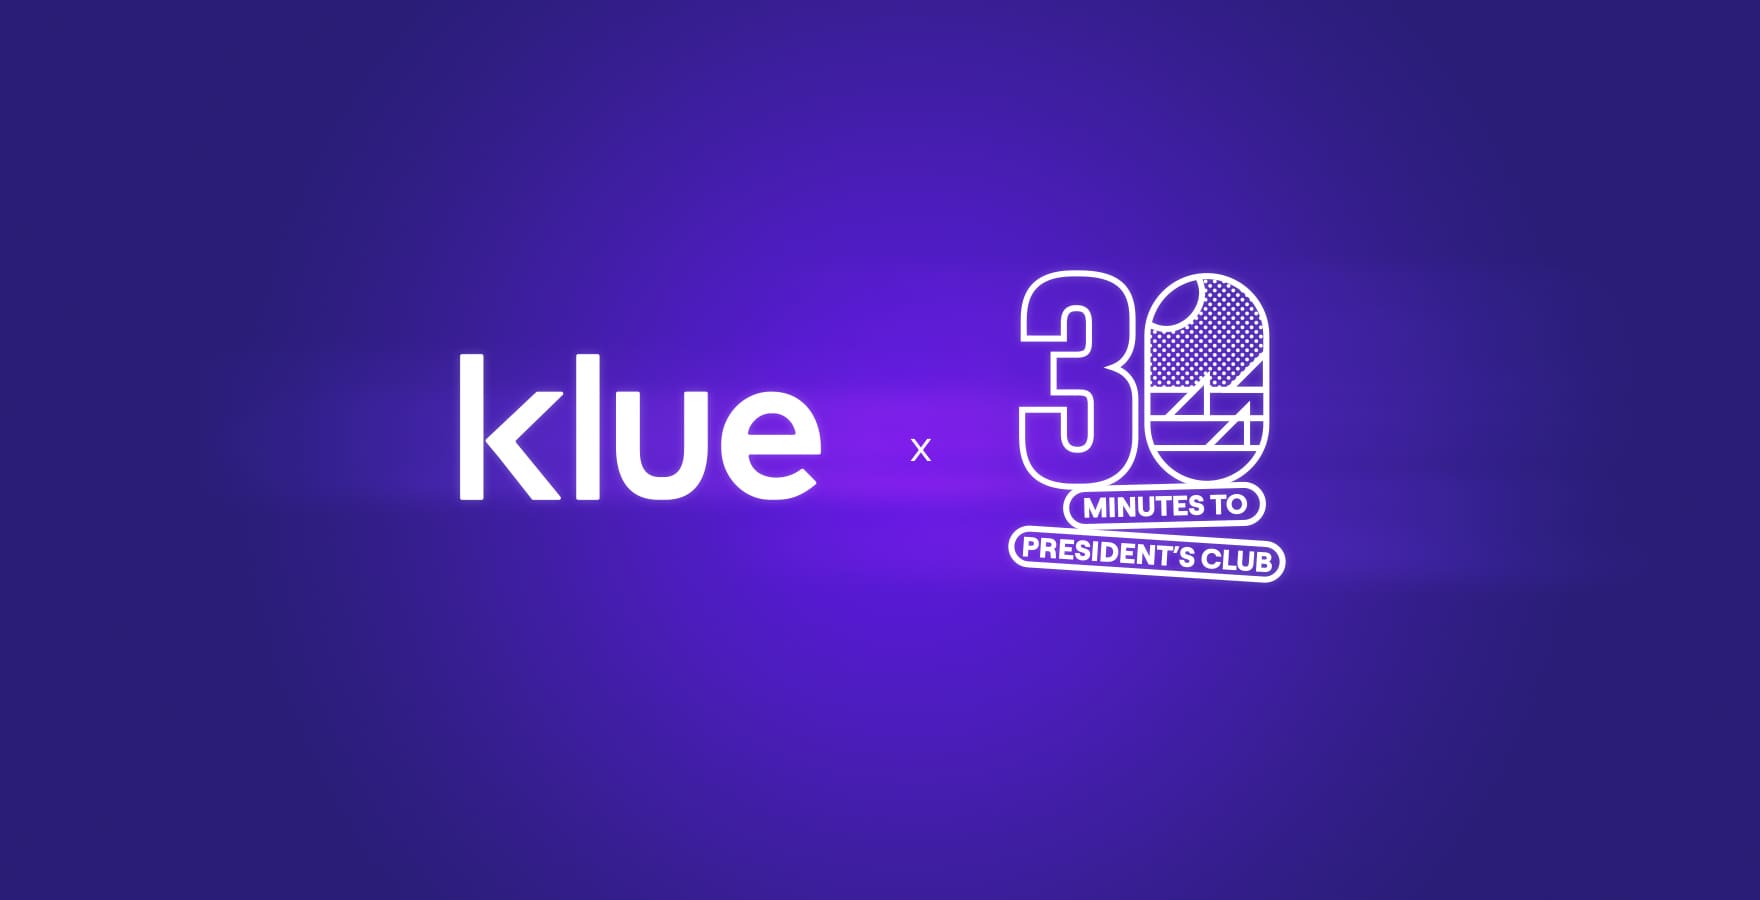 Klue x 30 Minutes to President’s Club: 4 Tips to Outsell the Competition